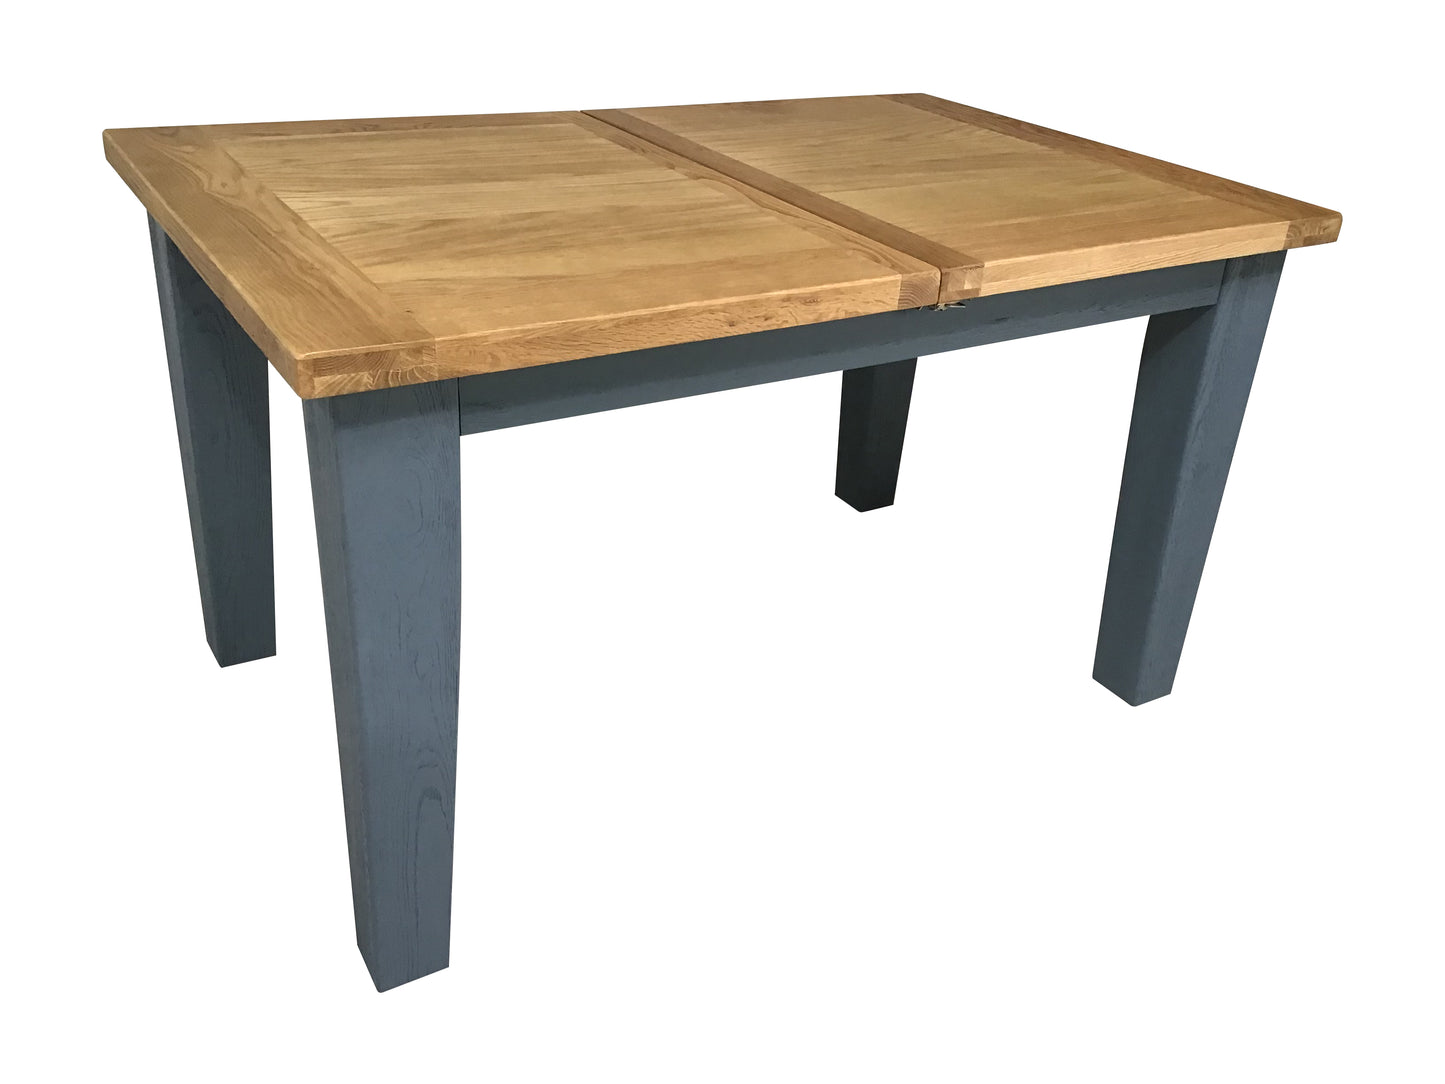 Calgary Oak 1.4m Ext Dining Table painted Night Blue